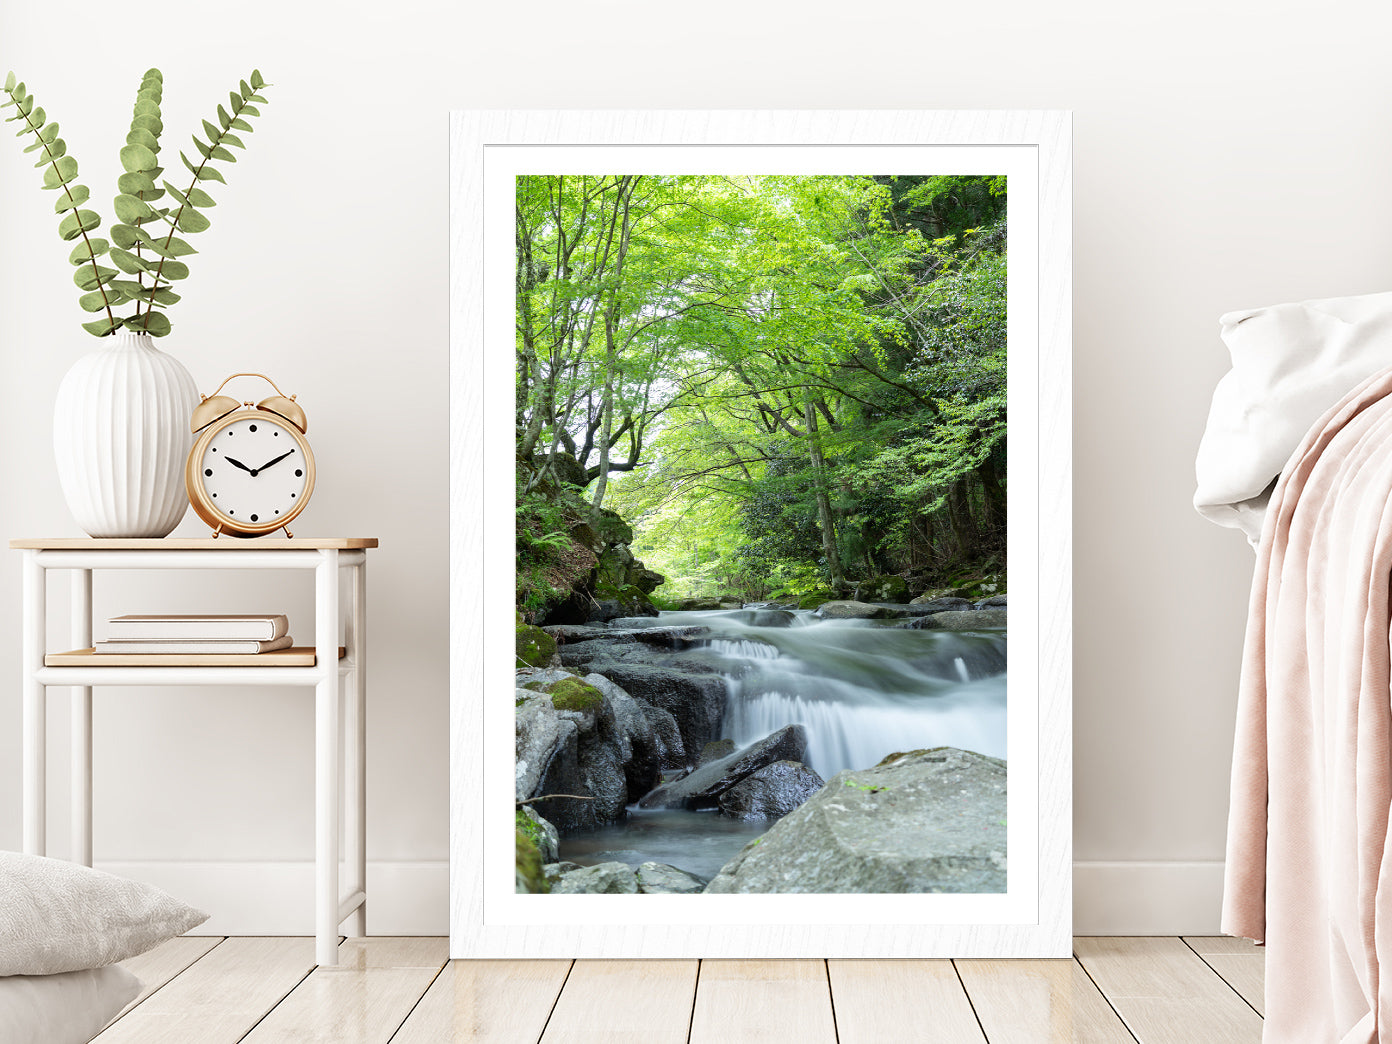 Rocky Riverside With Forest Glass Framed Wall Art, Ready to Hang Quality Print With White Border White